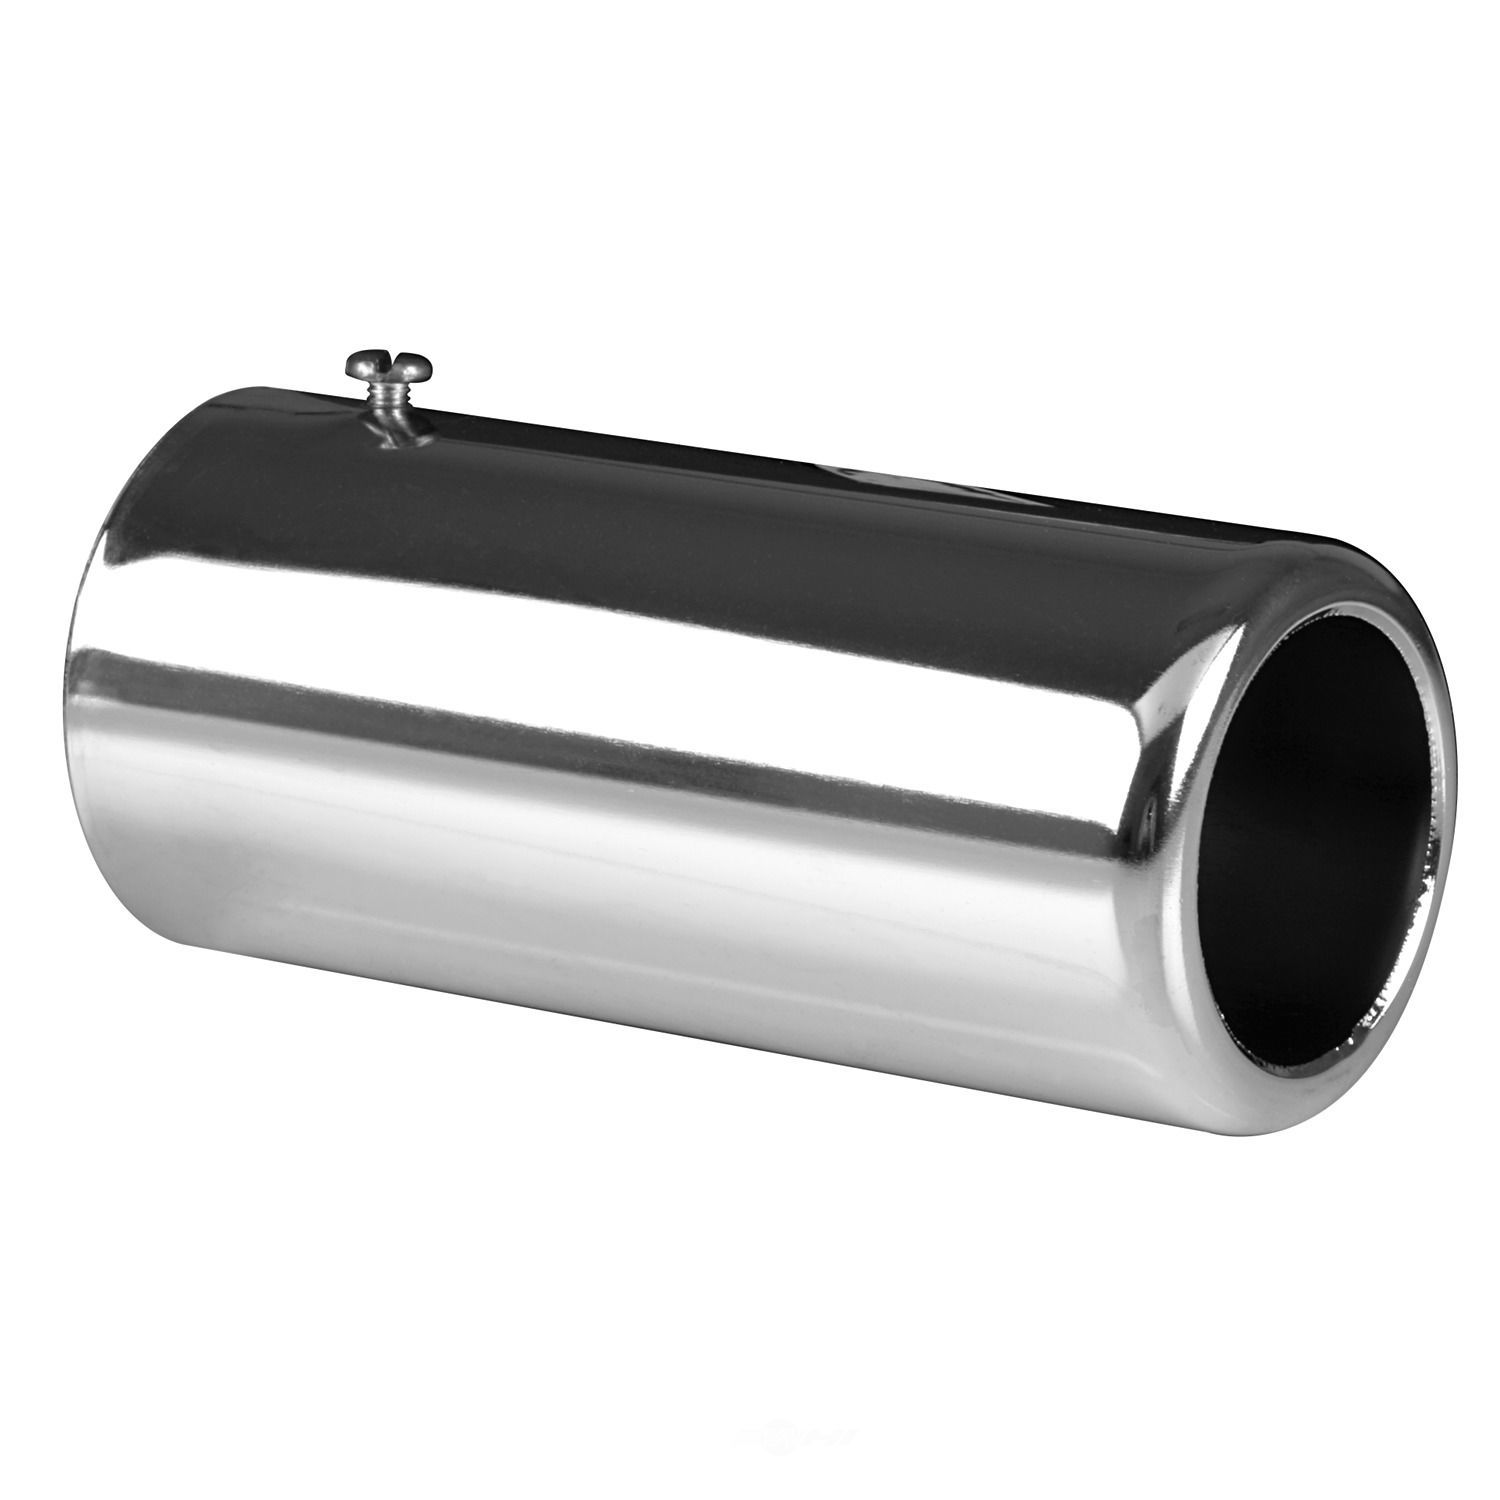 AP EXHAUST W/FEDERAL CONVERTER - Exhaust Tail Pipe Tip - APF 9819